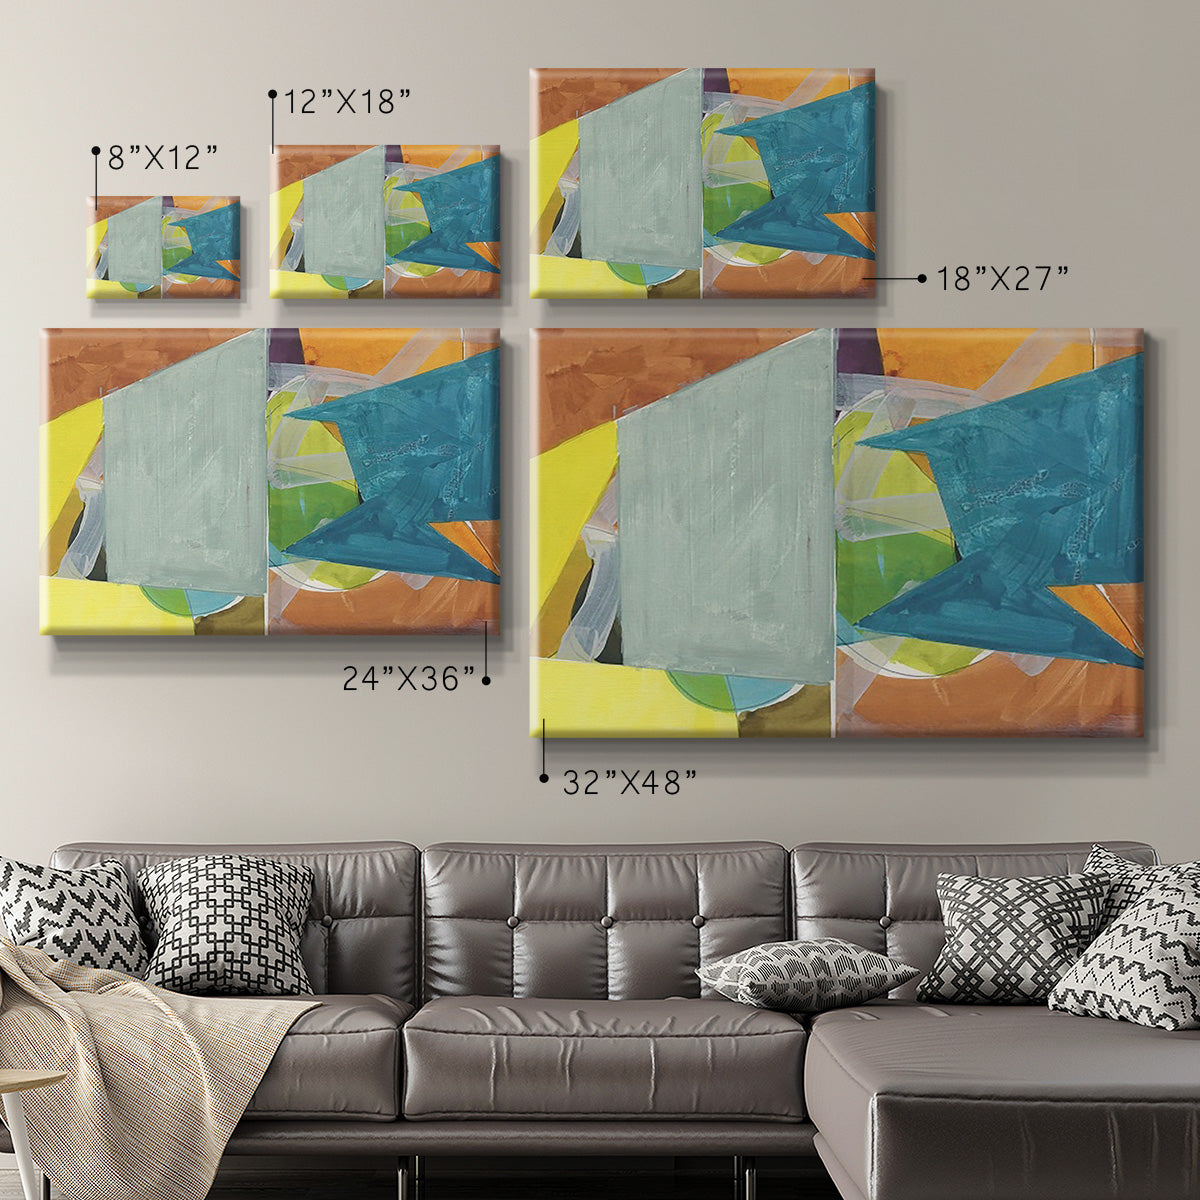 Jigsaw 2 Premium Gallery Wrapped Canvas - Ready to Hang